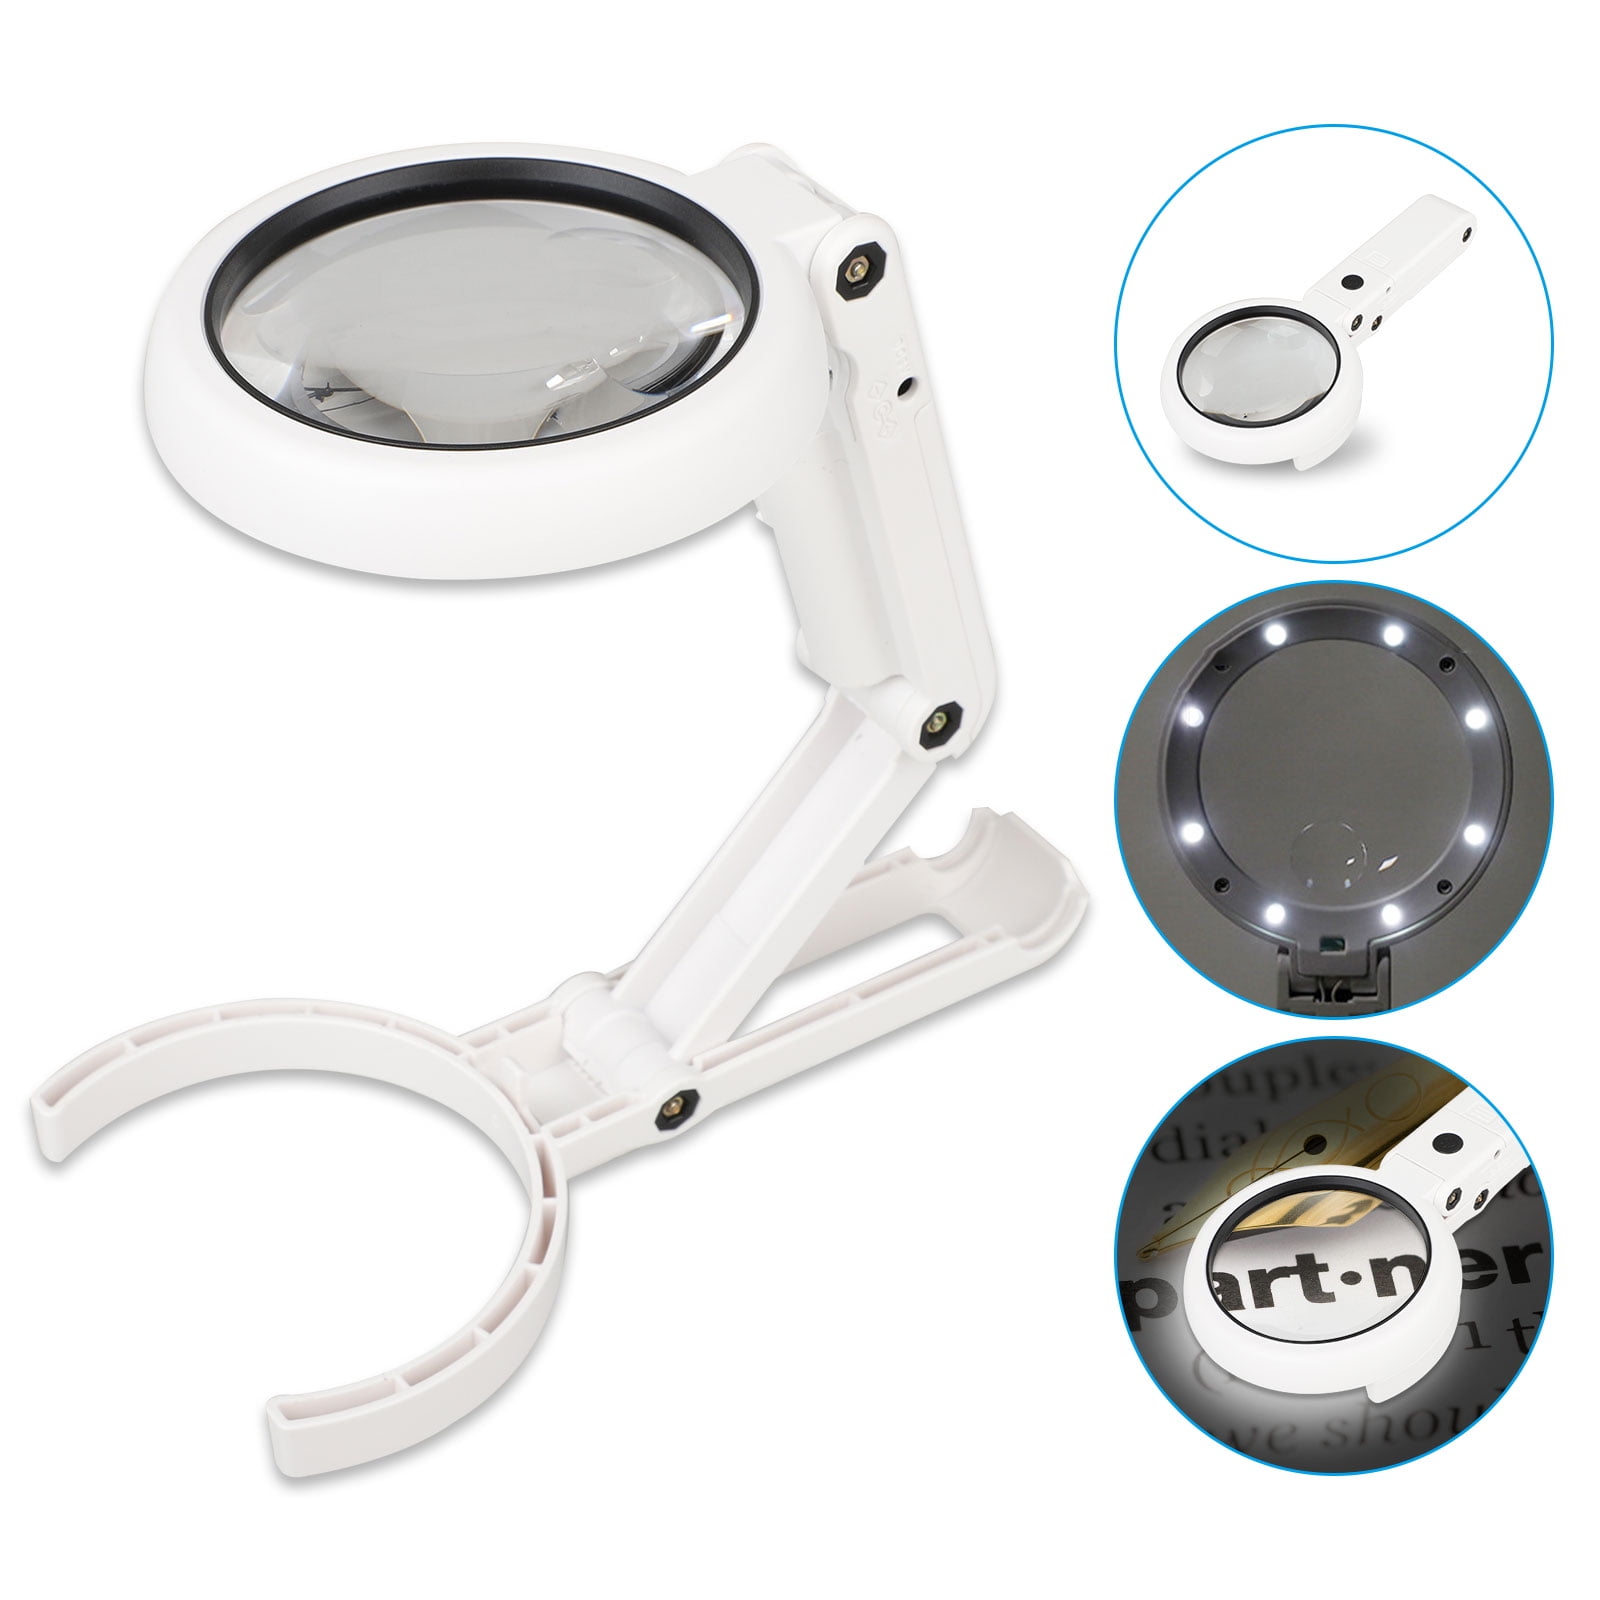 5X Large Hands Free Magnifying Glass Foldable Magnifier Light LED Reading 